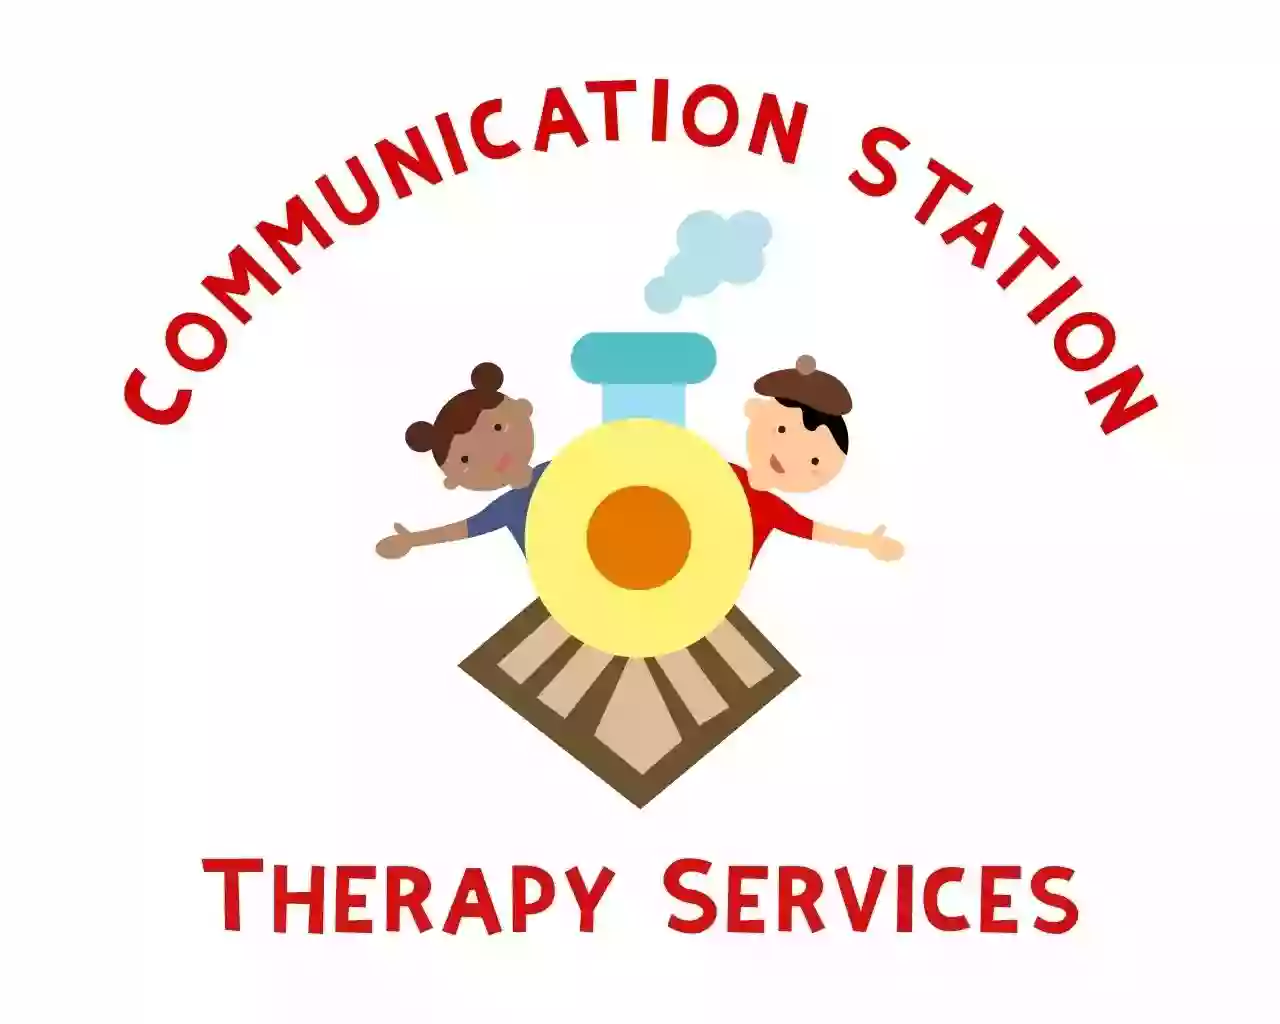 Communication Station Therapy Services